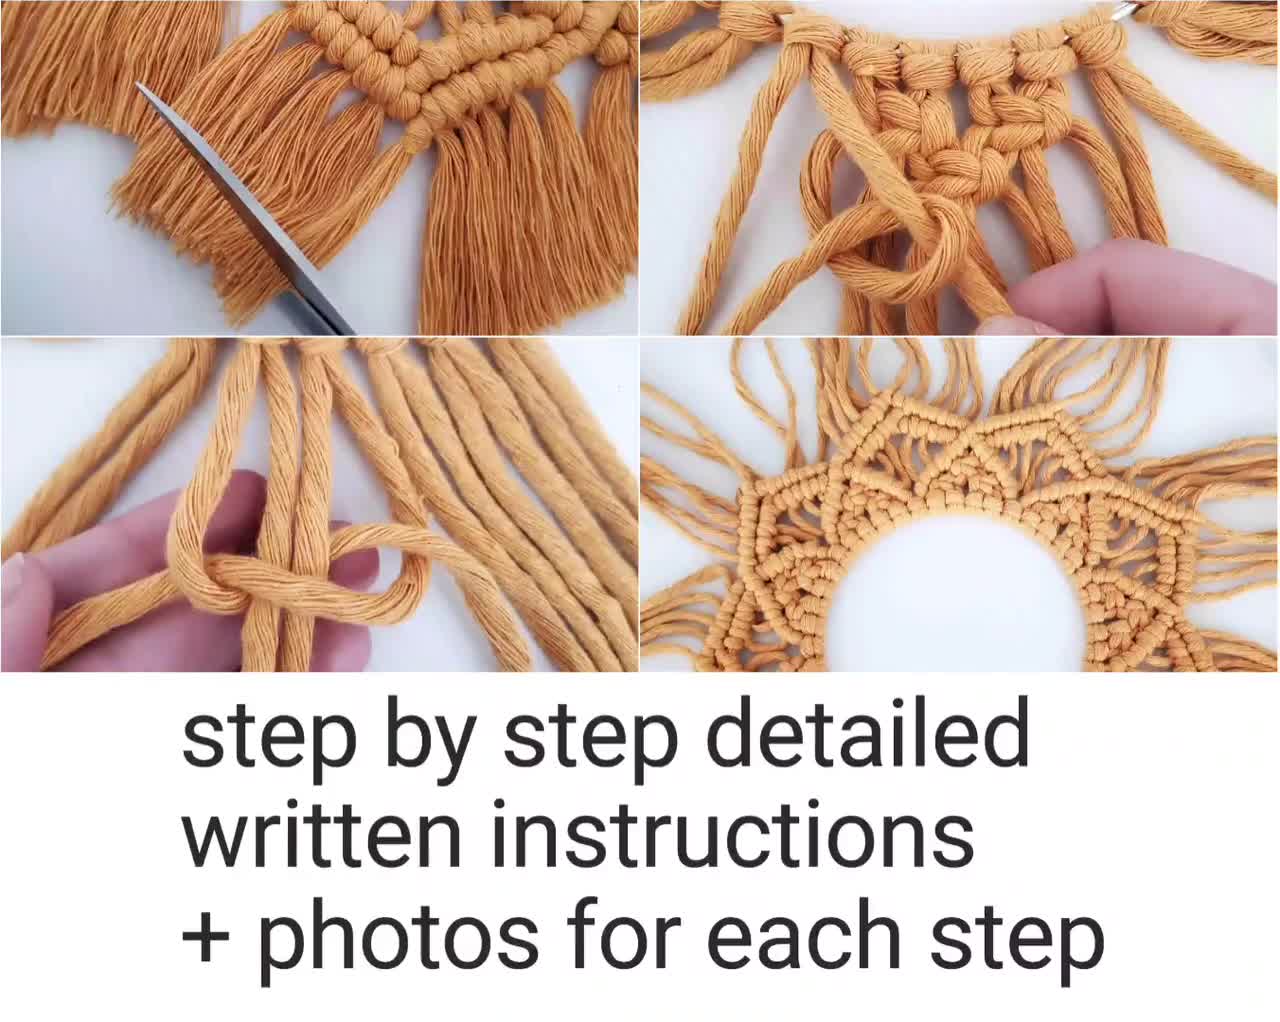 MACRAMÉ PATTERN BOOK FOR BEGINNERS: Complete Step by Step Guide On How to  make 10 DIY Macramé Projects with Techniques as Novice